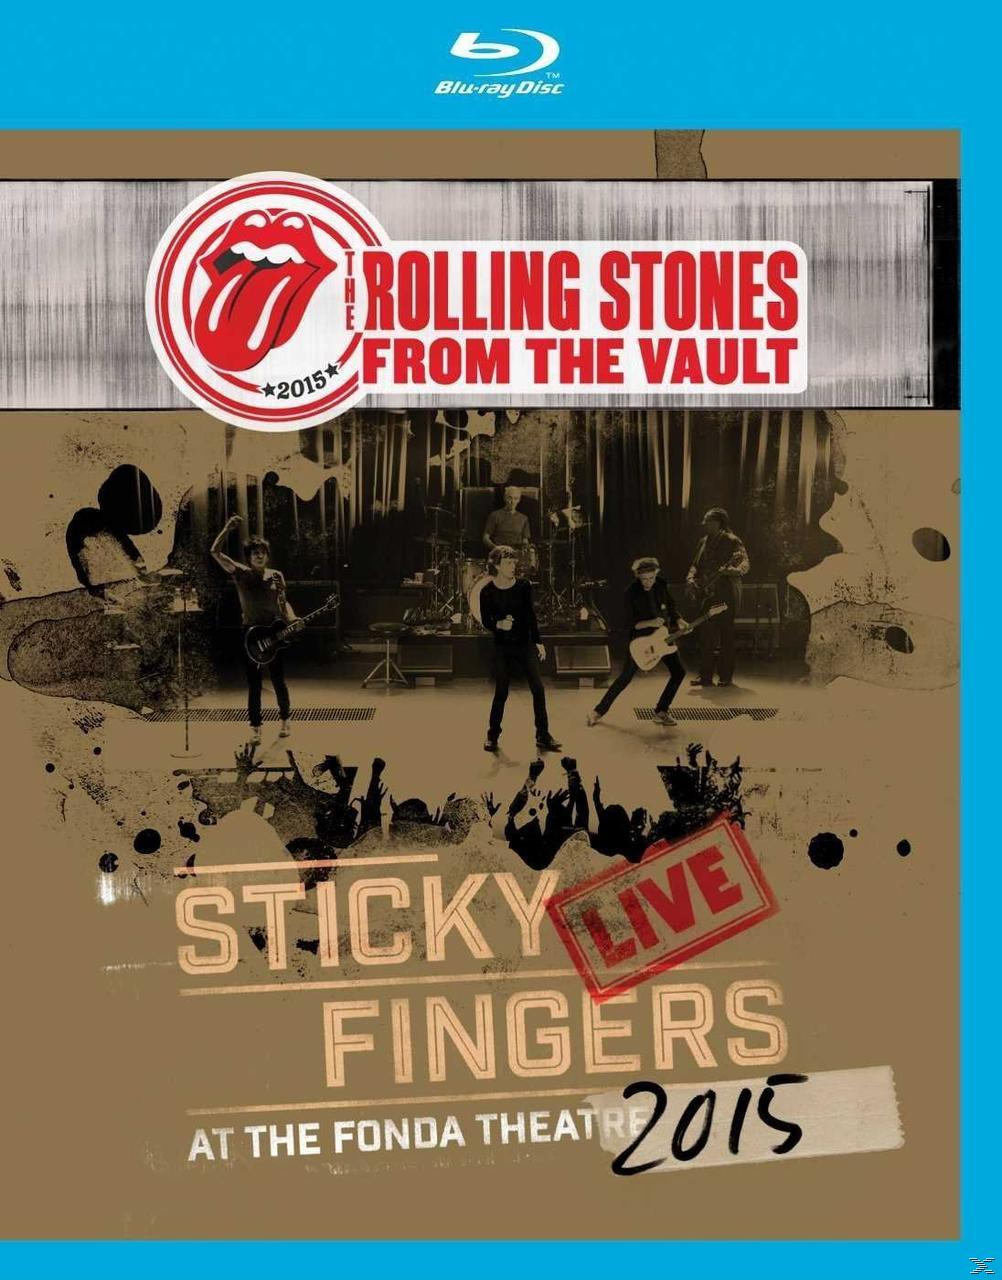 The Rolling Stones (Blu-Ray) - (Blu-ray) Vault: - Sticky Live The 2015 From Fingers